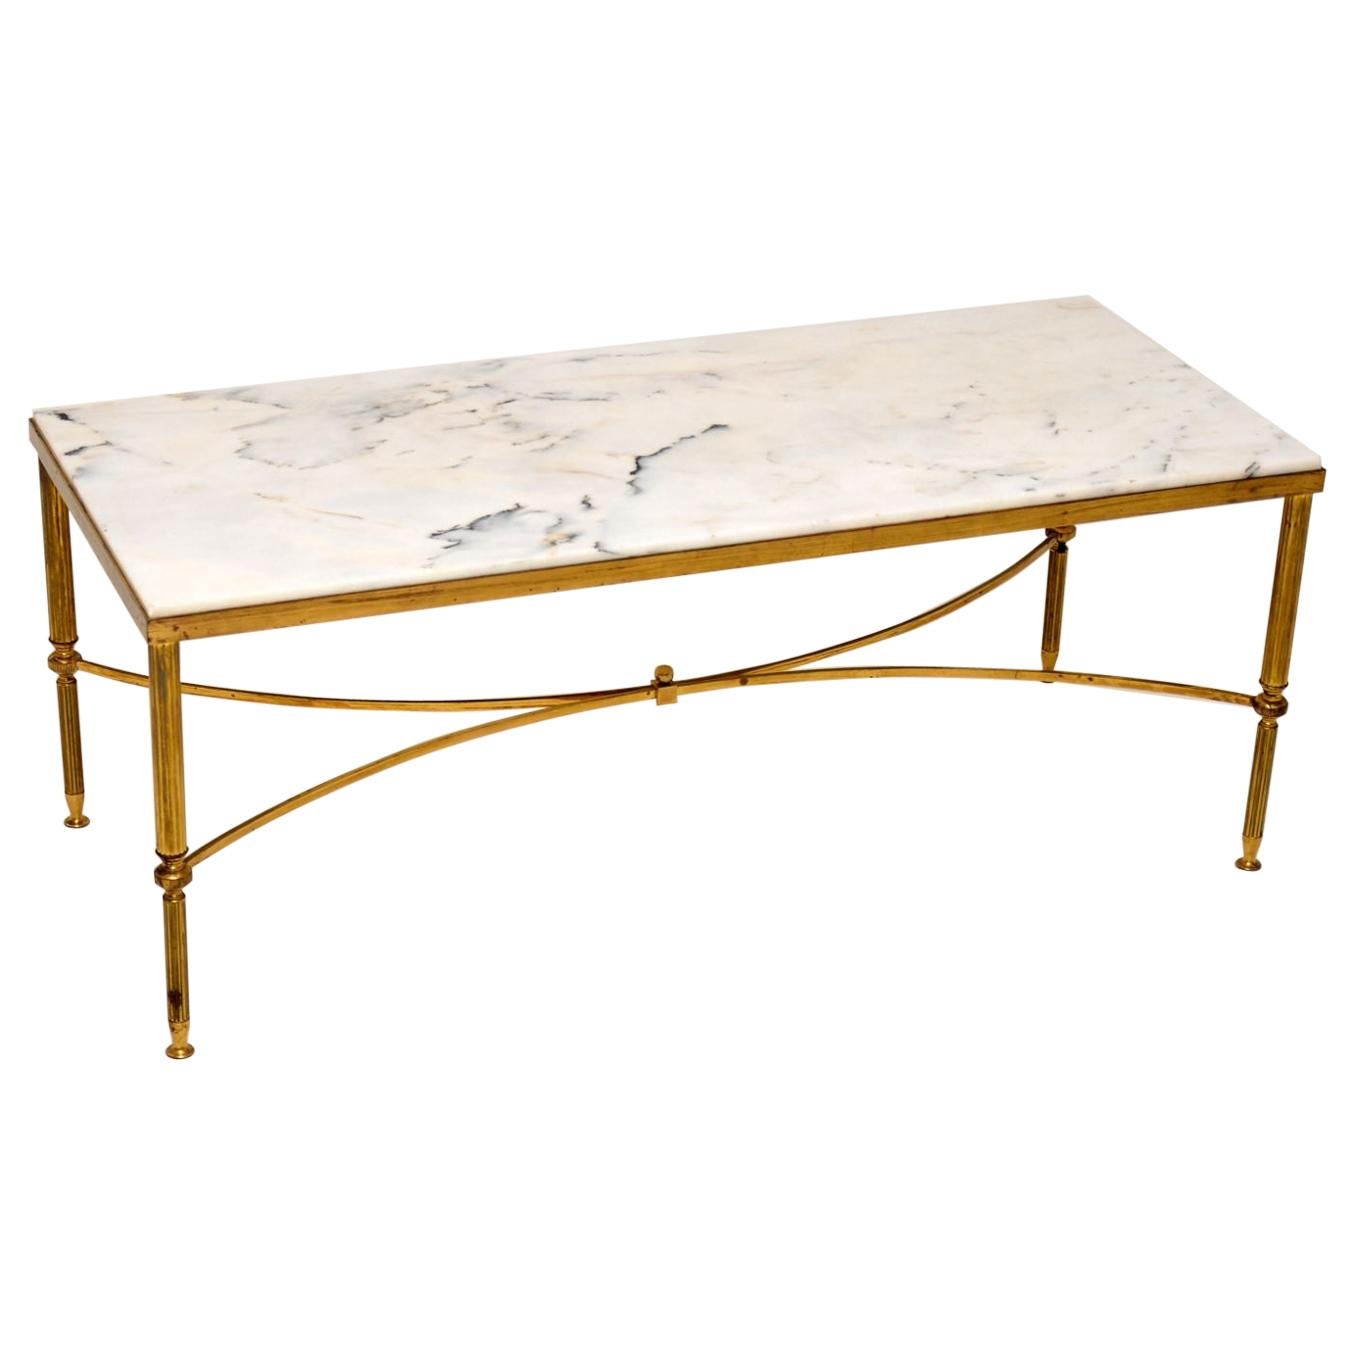 1950s Italian Vintage Brass and Marble Coffee Table